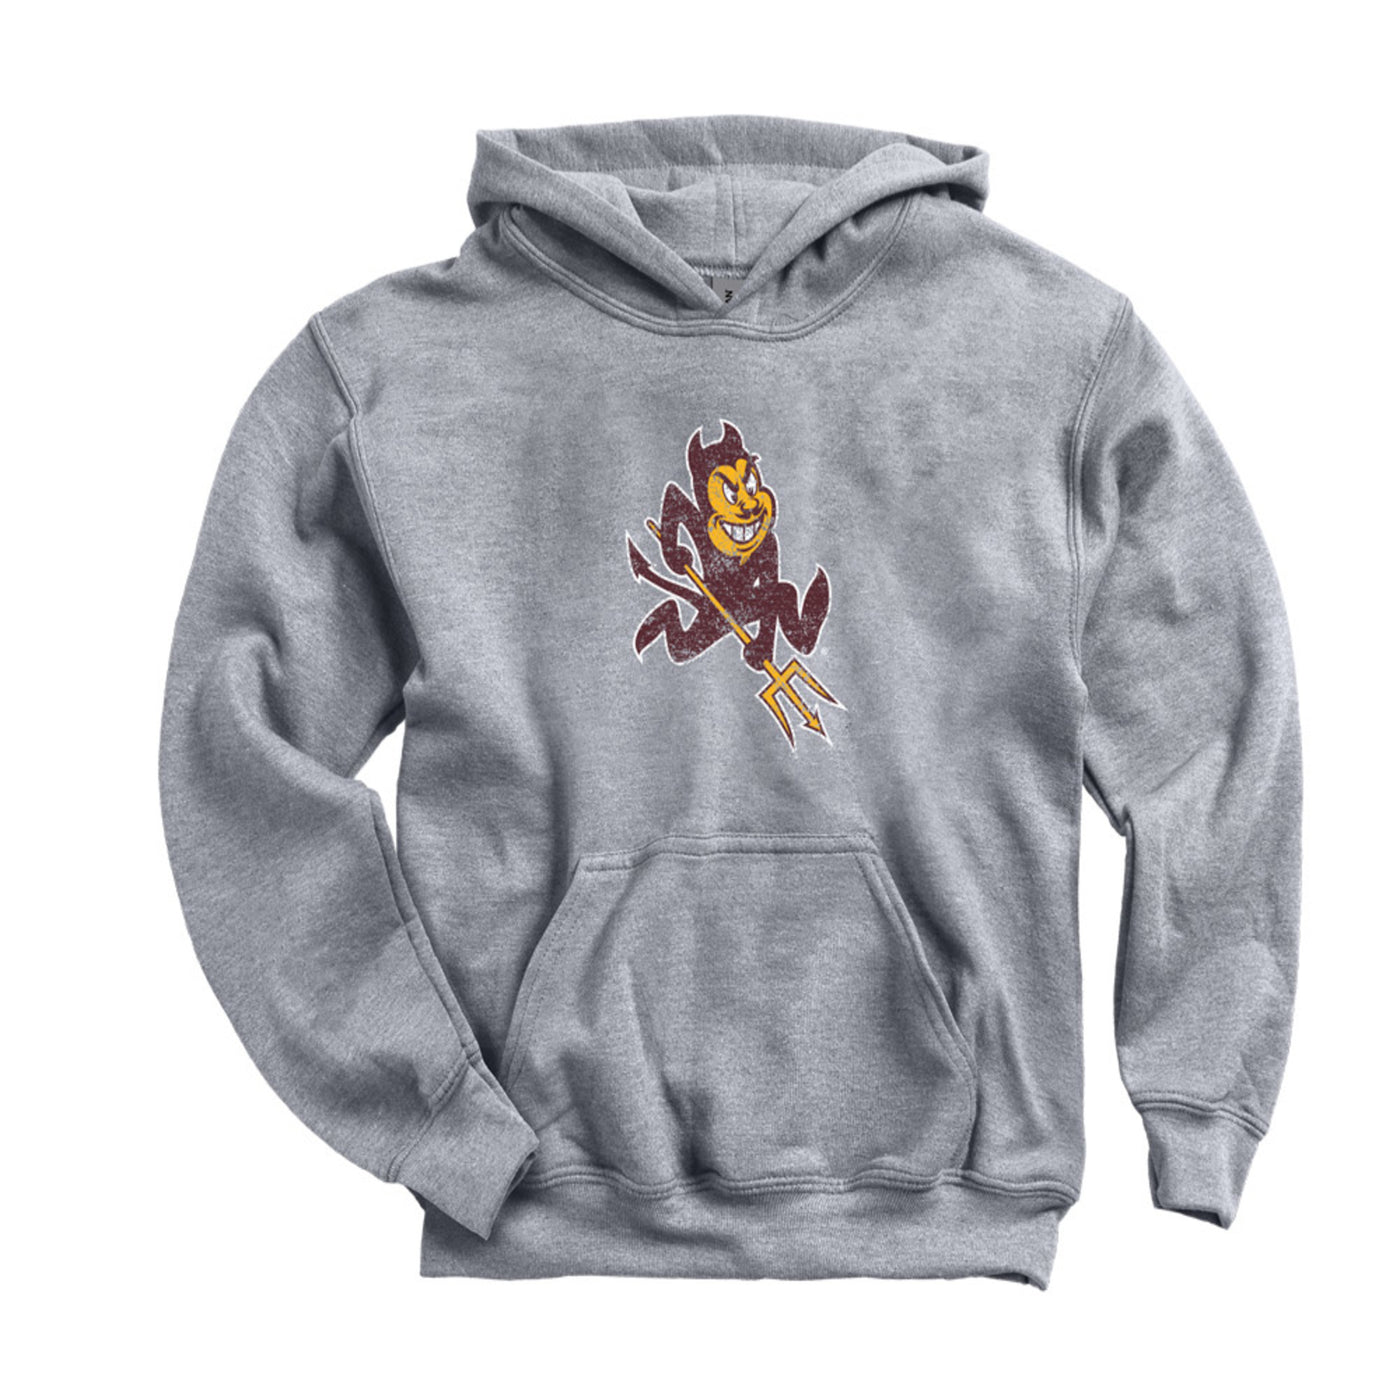 ASU grey youth hoodie with the sparky mascot on the front.